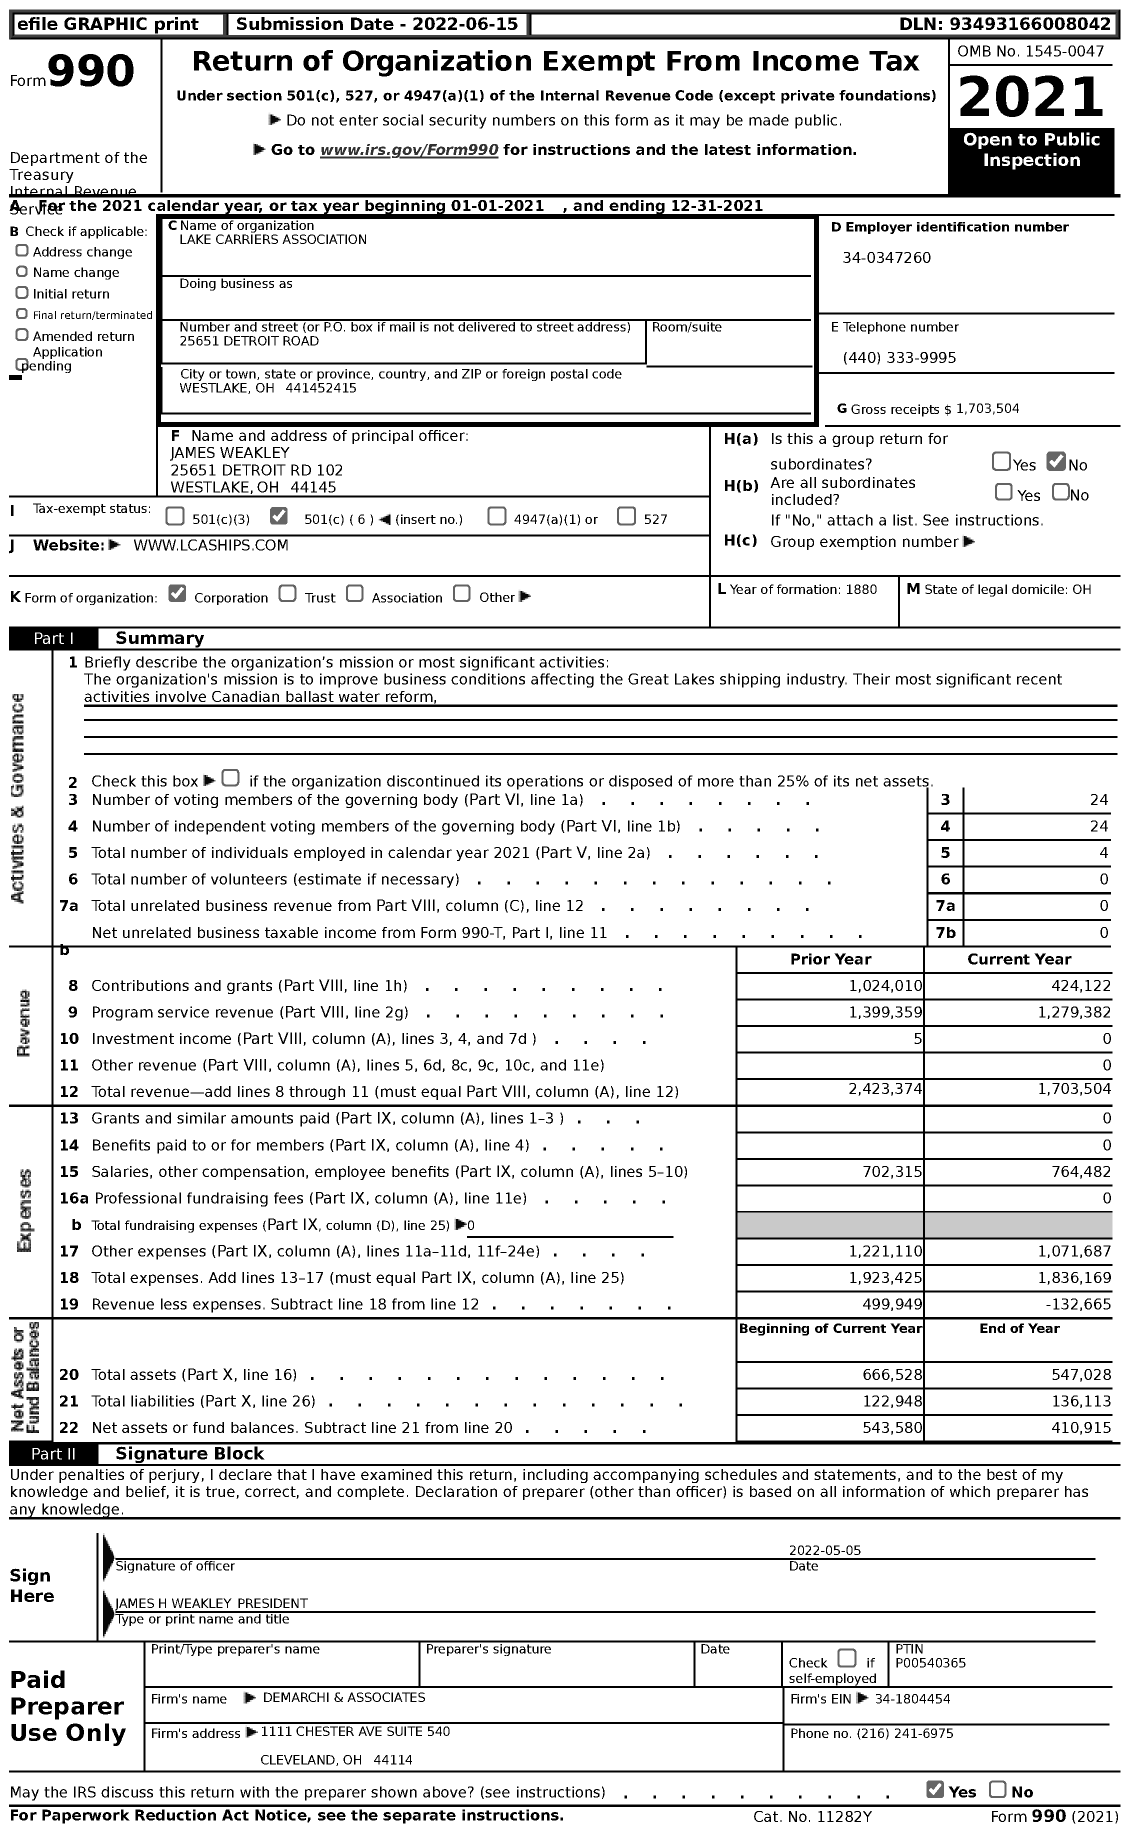 Image of first page of 2021 Form 990 for Lake Carriers Association (LCA)